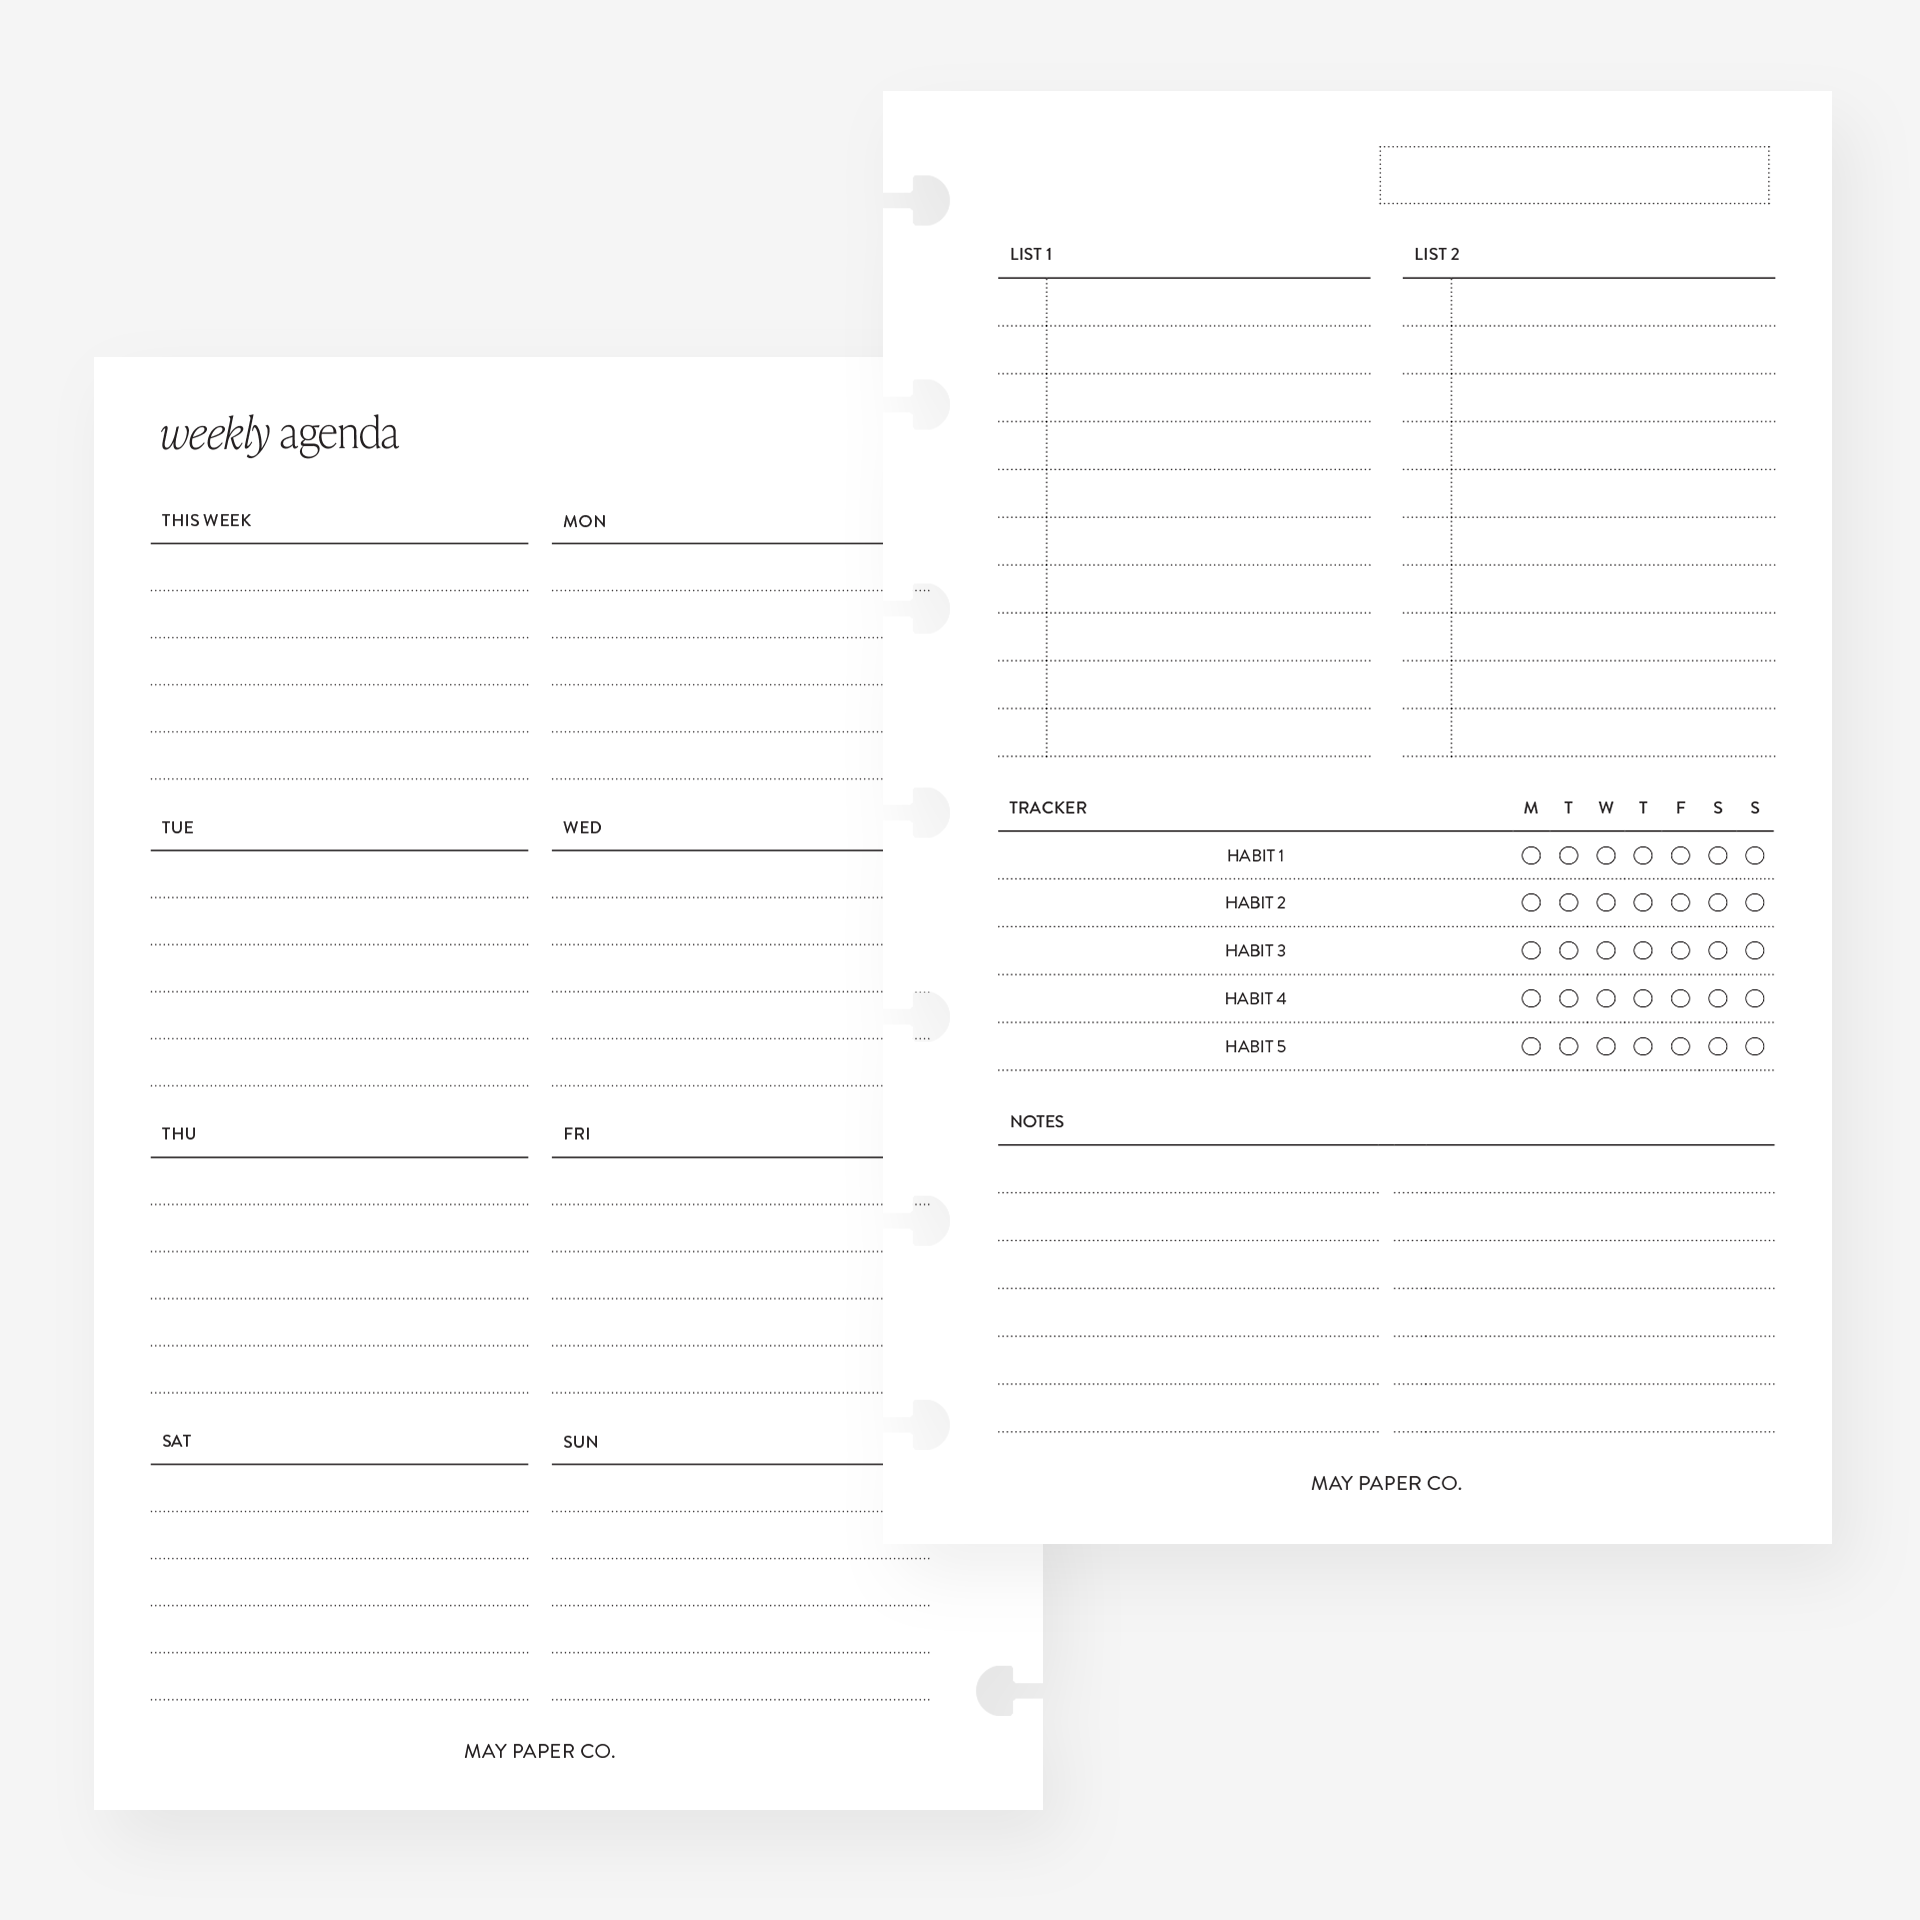 CUSTOM HEADERS Undated Weekly NO.05 with Tracker Planner Insert